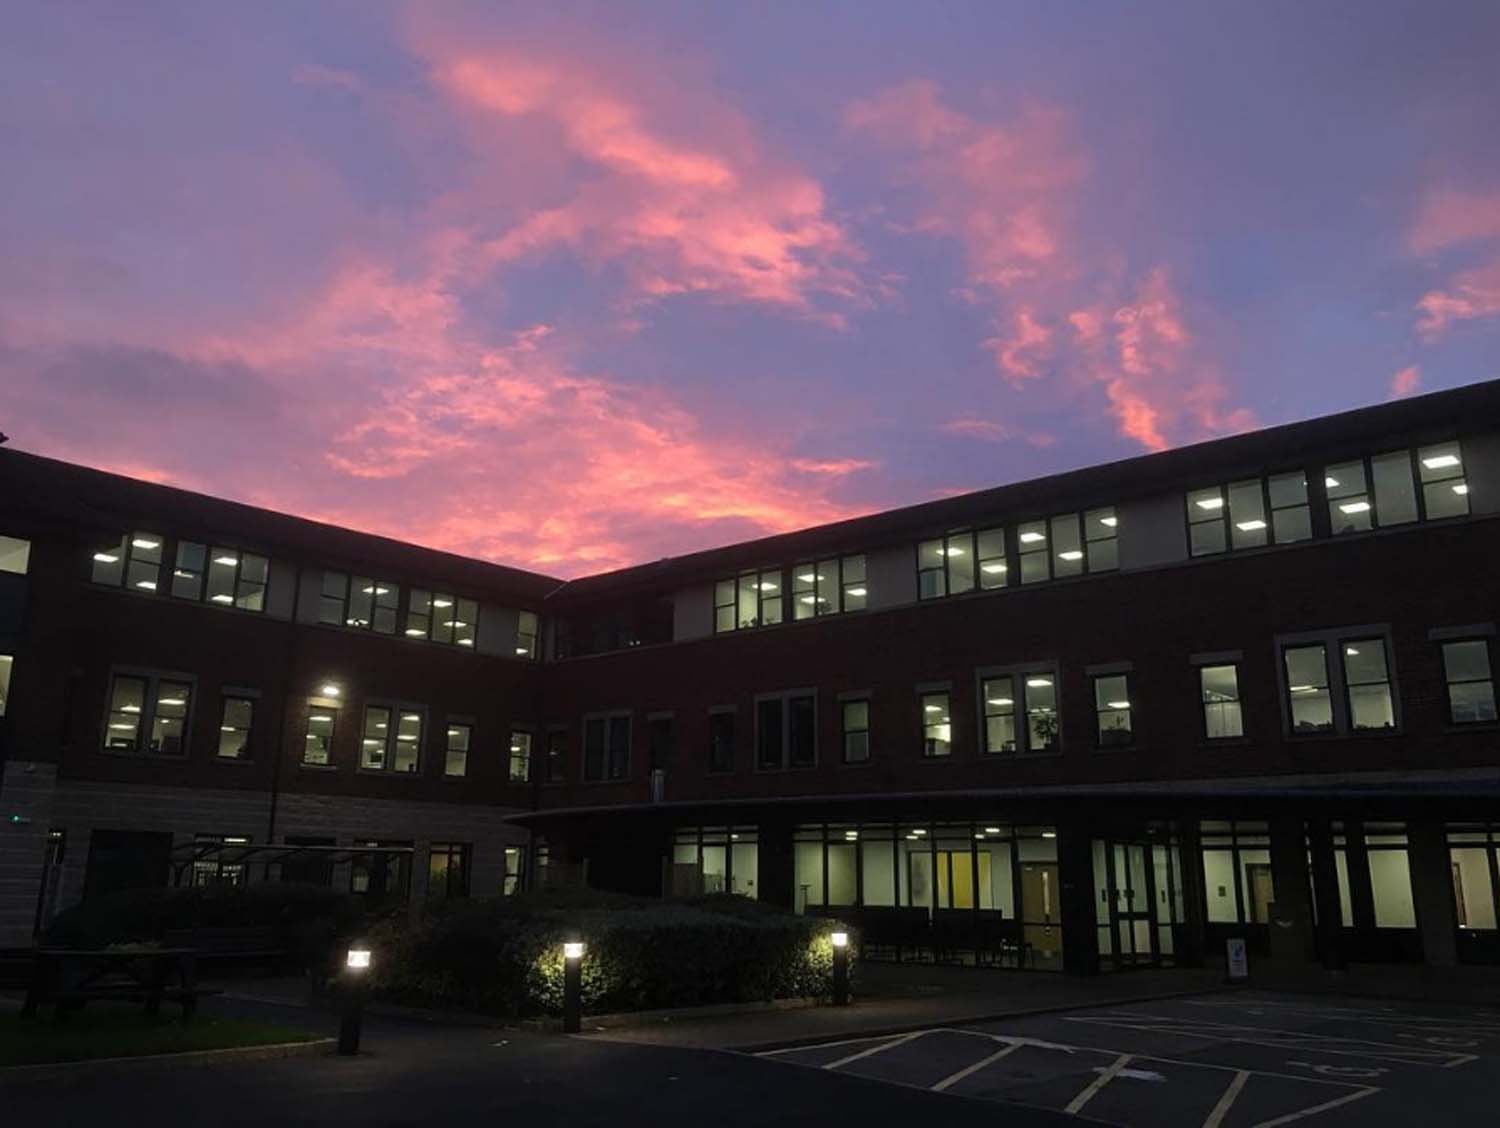 An early morning sky over the new HQ in Northallerton